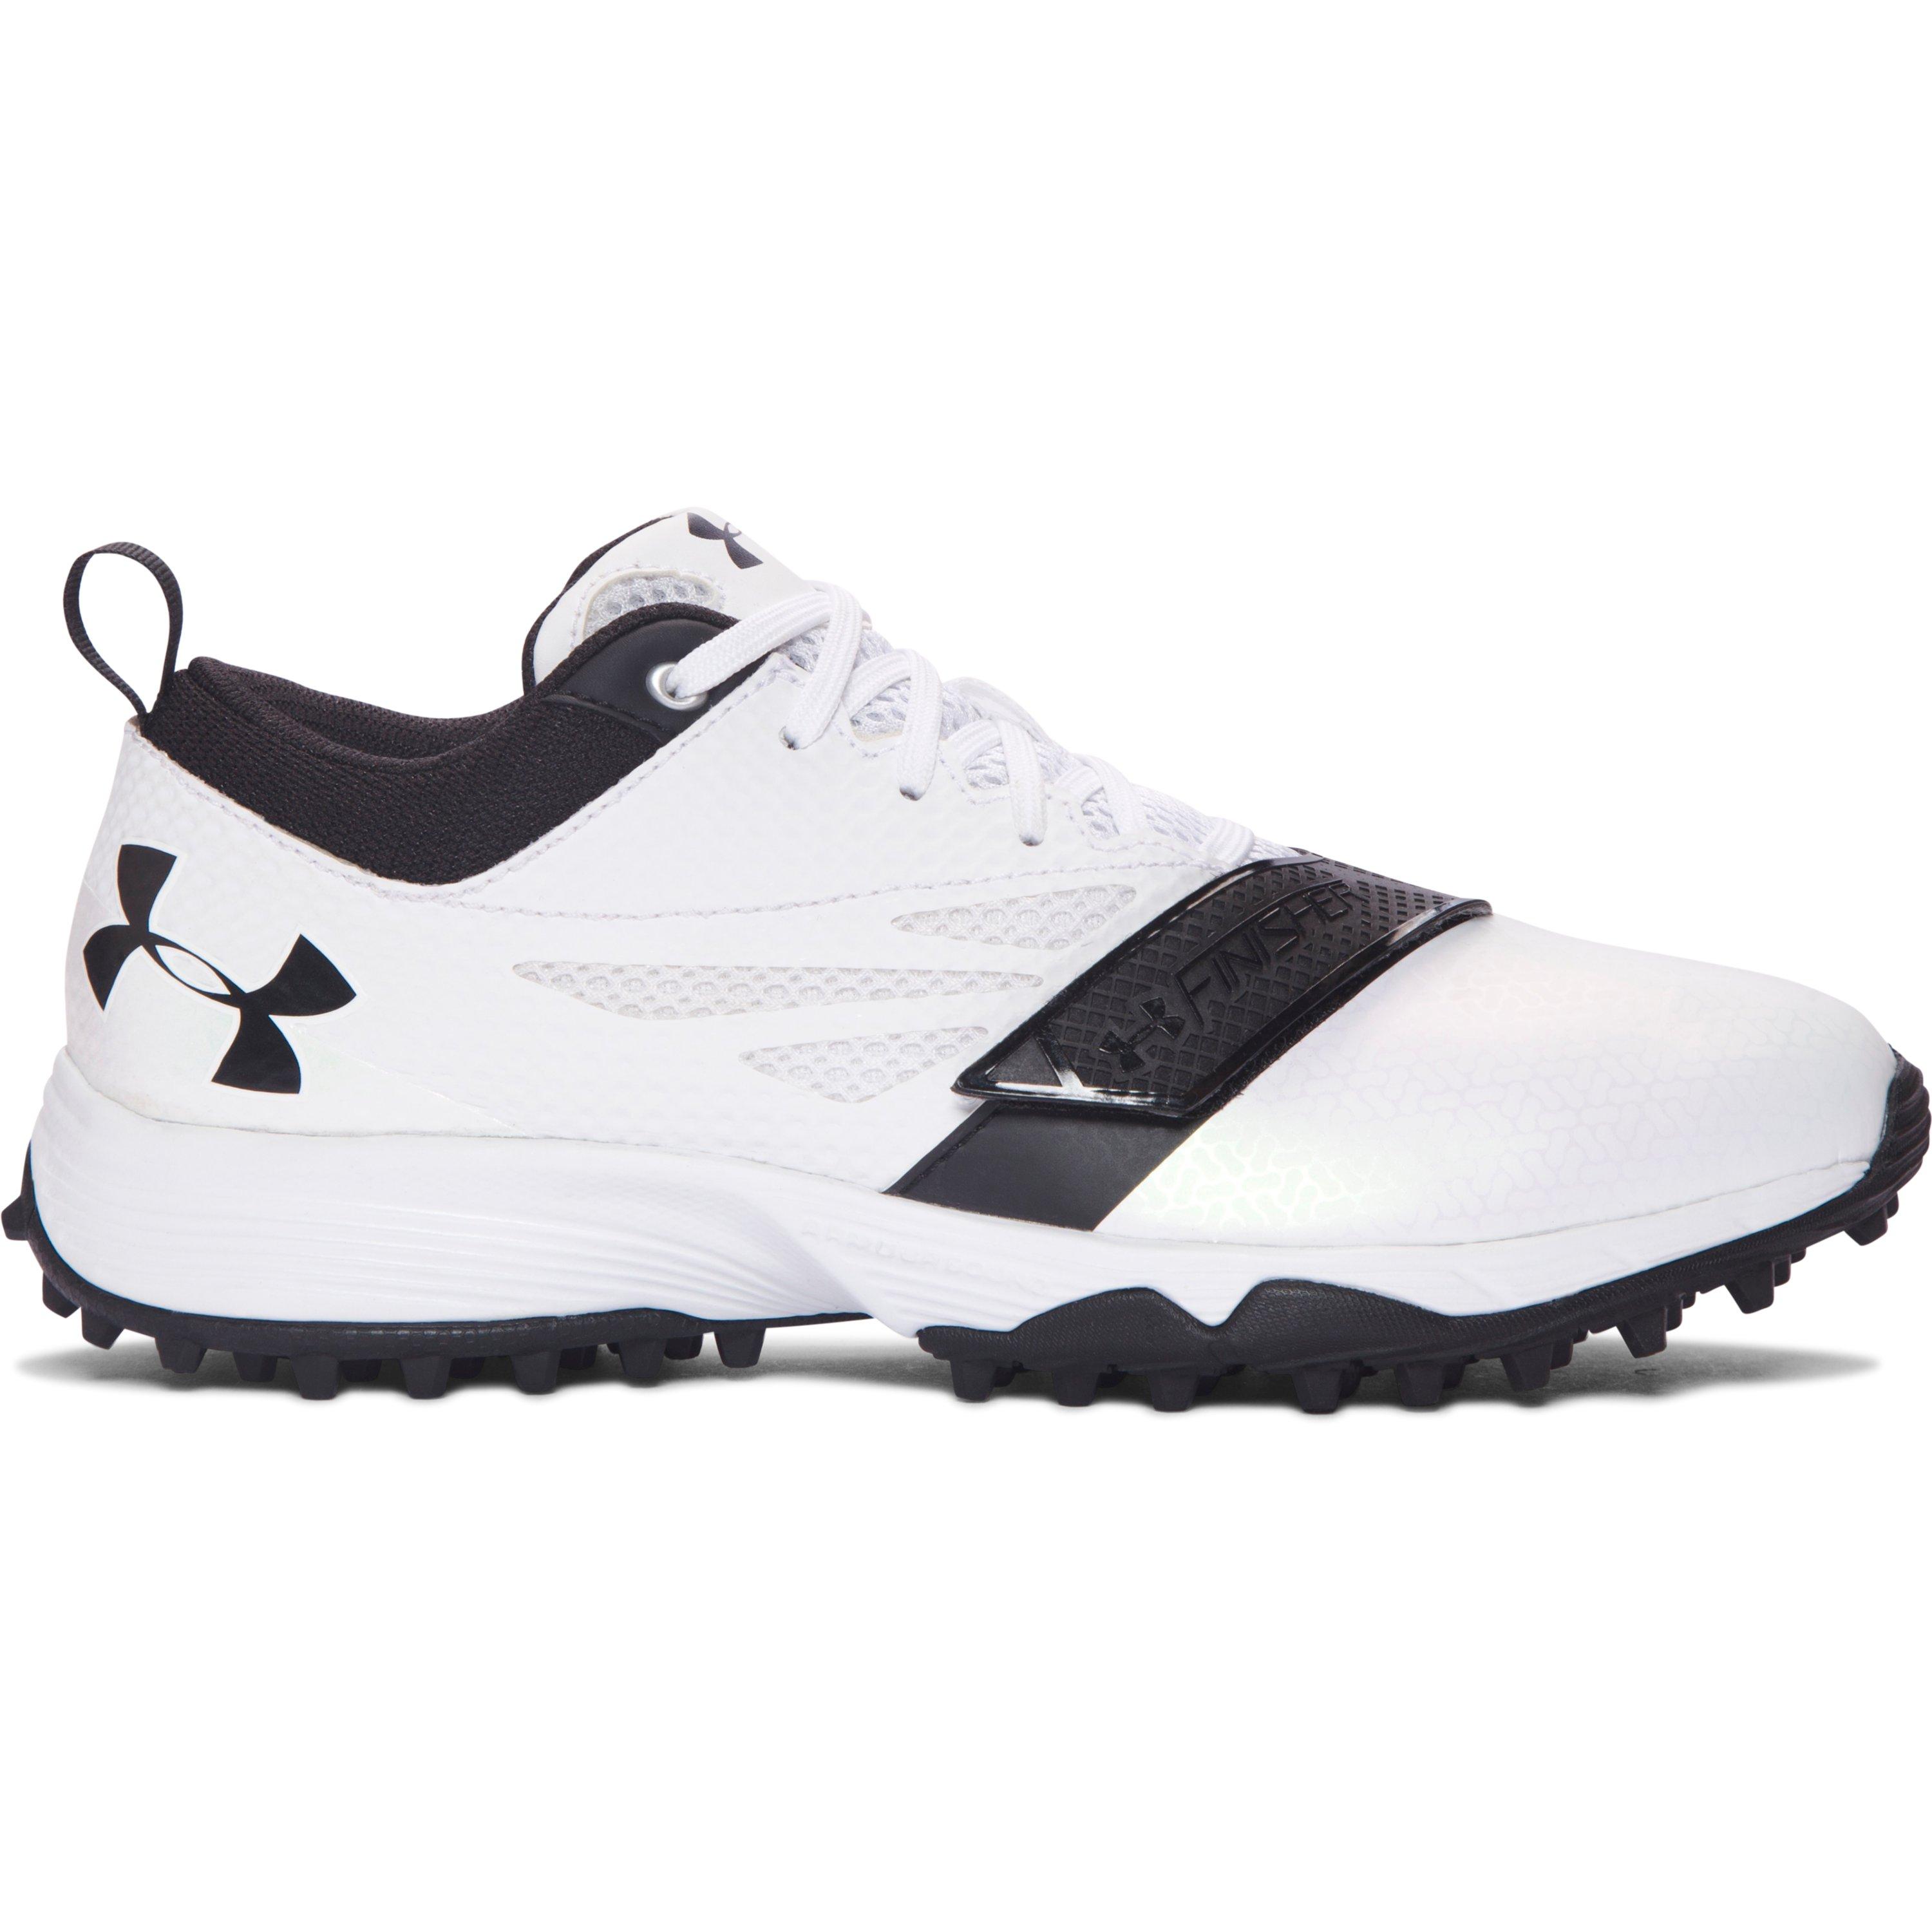 Under armour Women's Ua Finisher Turf Lacrosse Cleats Lyst